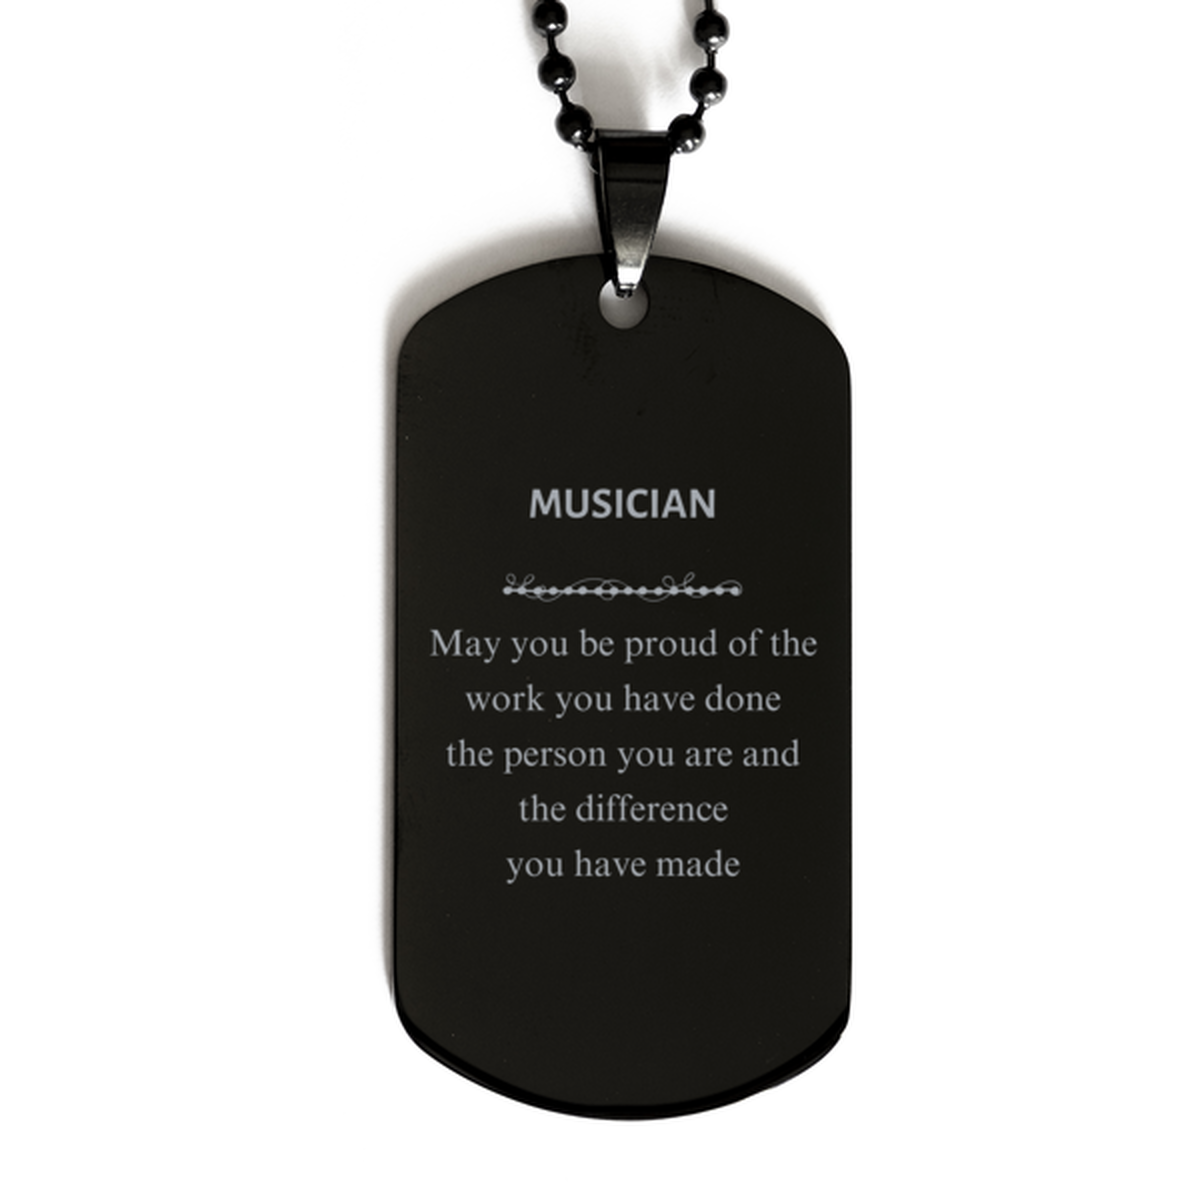 Musician May you be proud of the work you have done, Retirement Musician Black Dog Tag for Colleague Appreciation Gifts Amazing for Musician